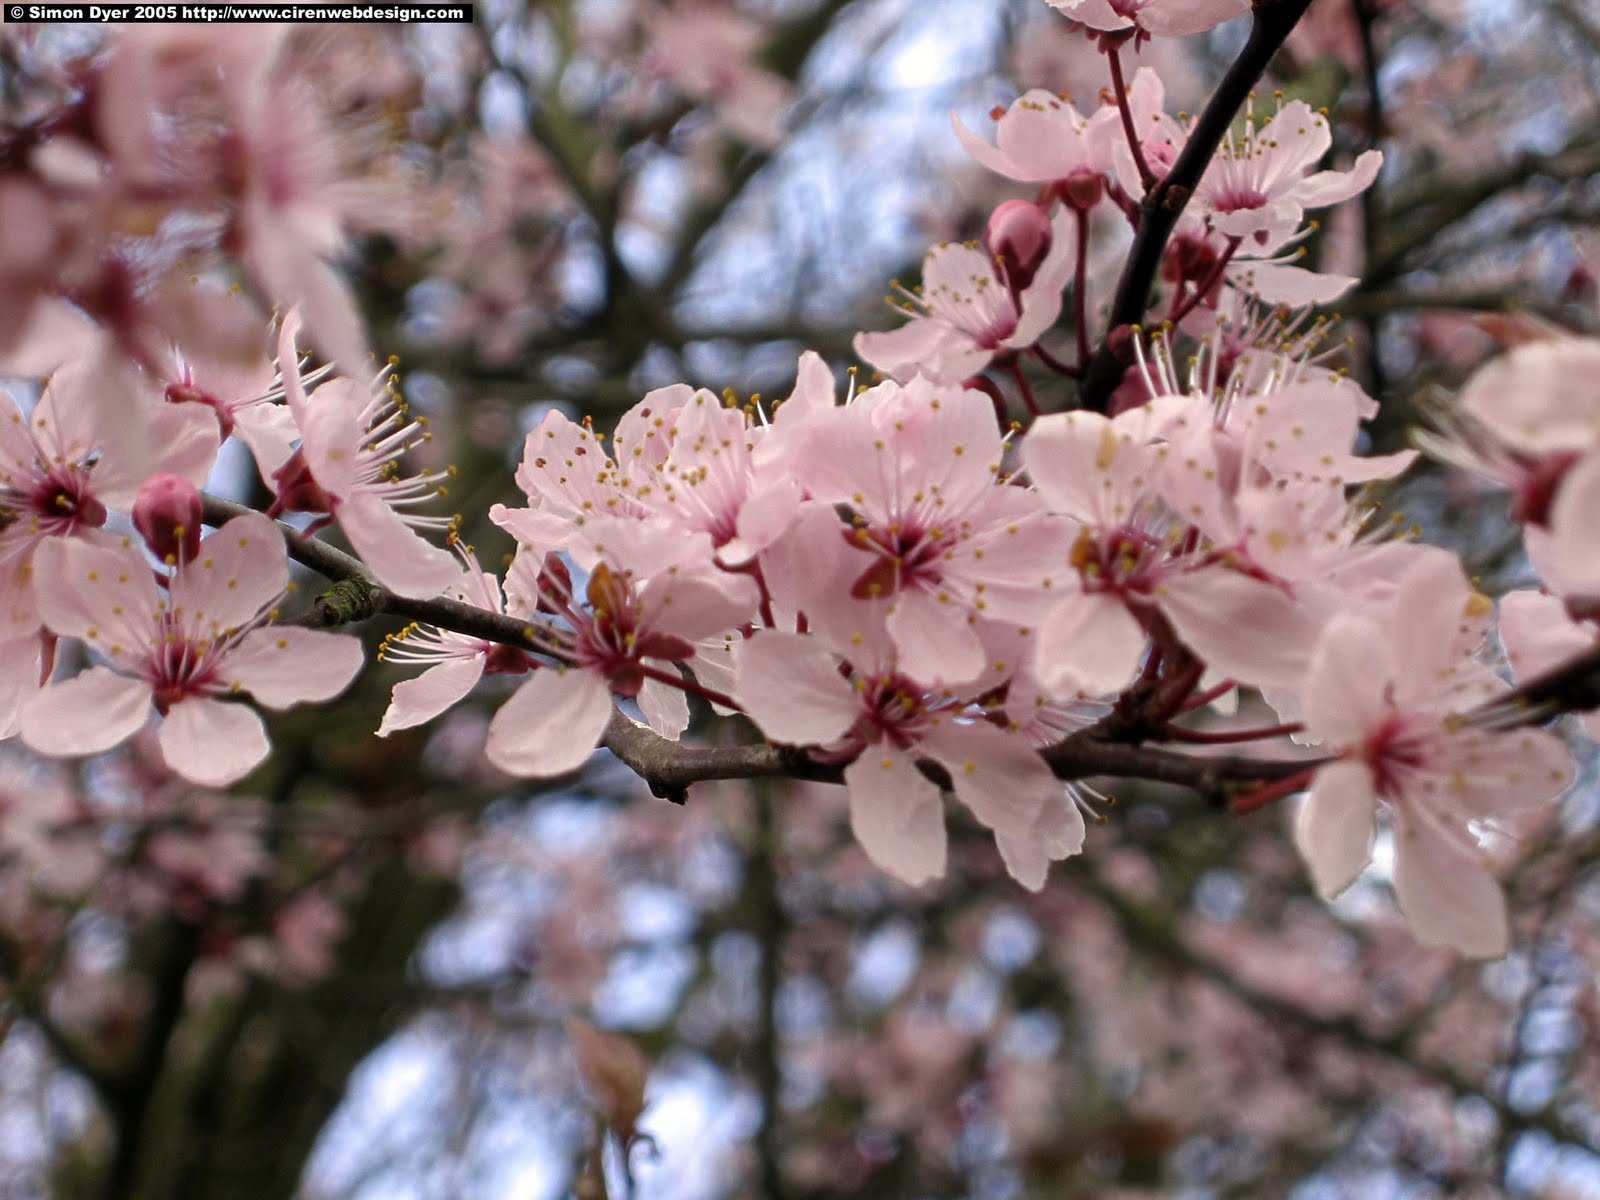 Wallpapers, Amazing Wallpapers, 3D Wallpaper: Natural Cherry Blossom ...